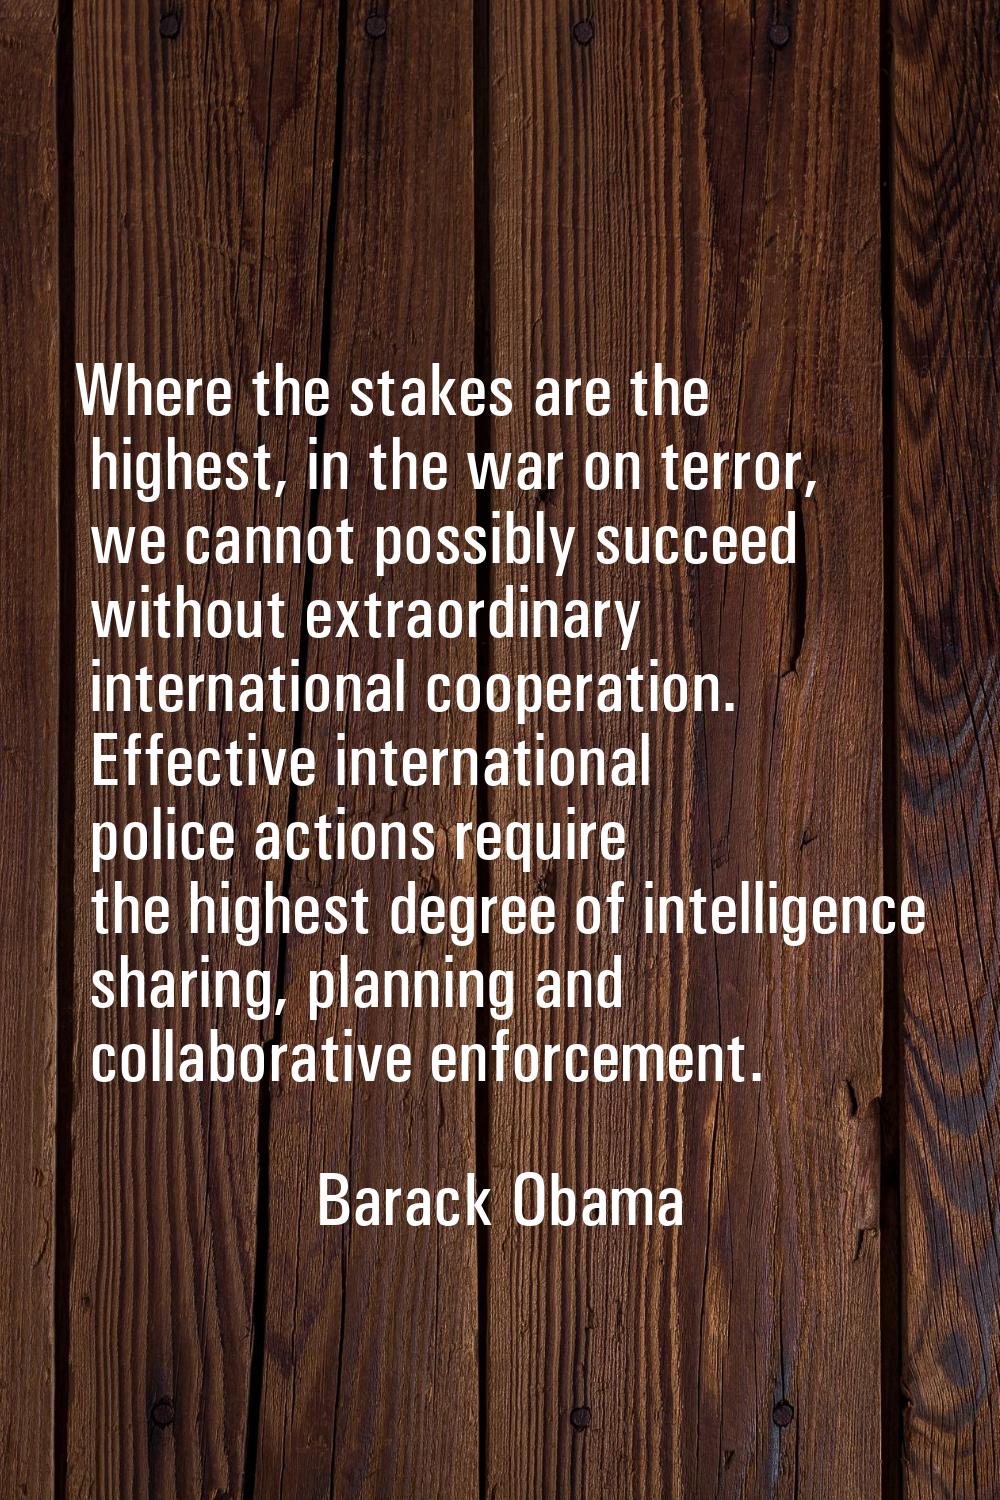 Where the stakes are the highest, in the war on terror, we cannot possibly succeed without extraord